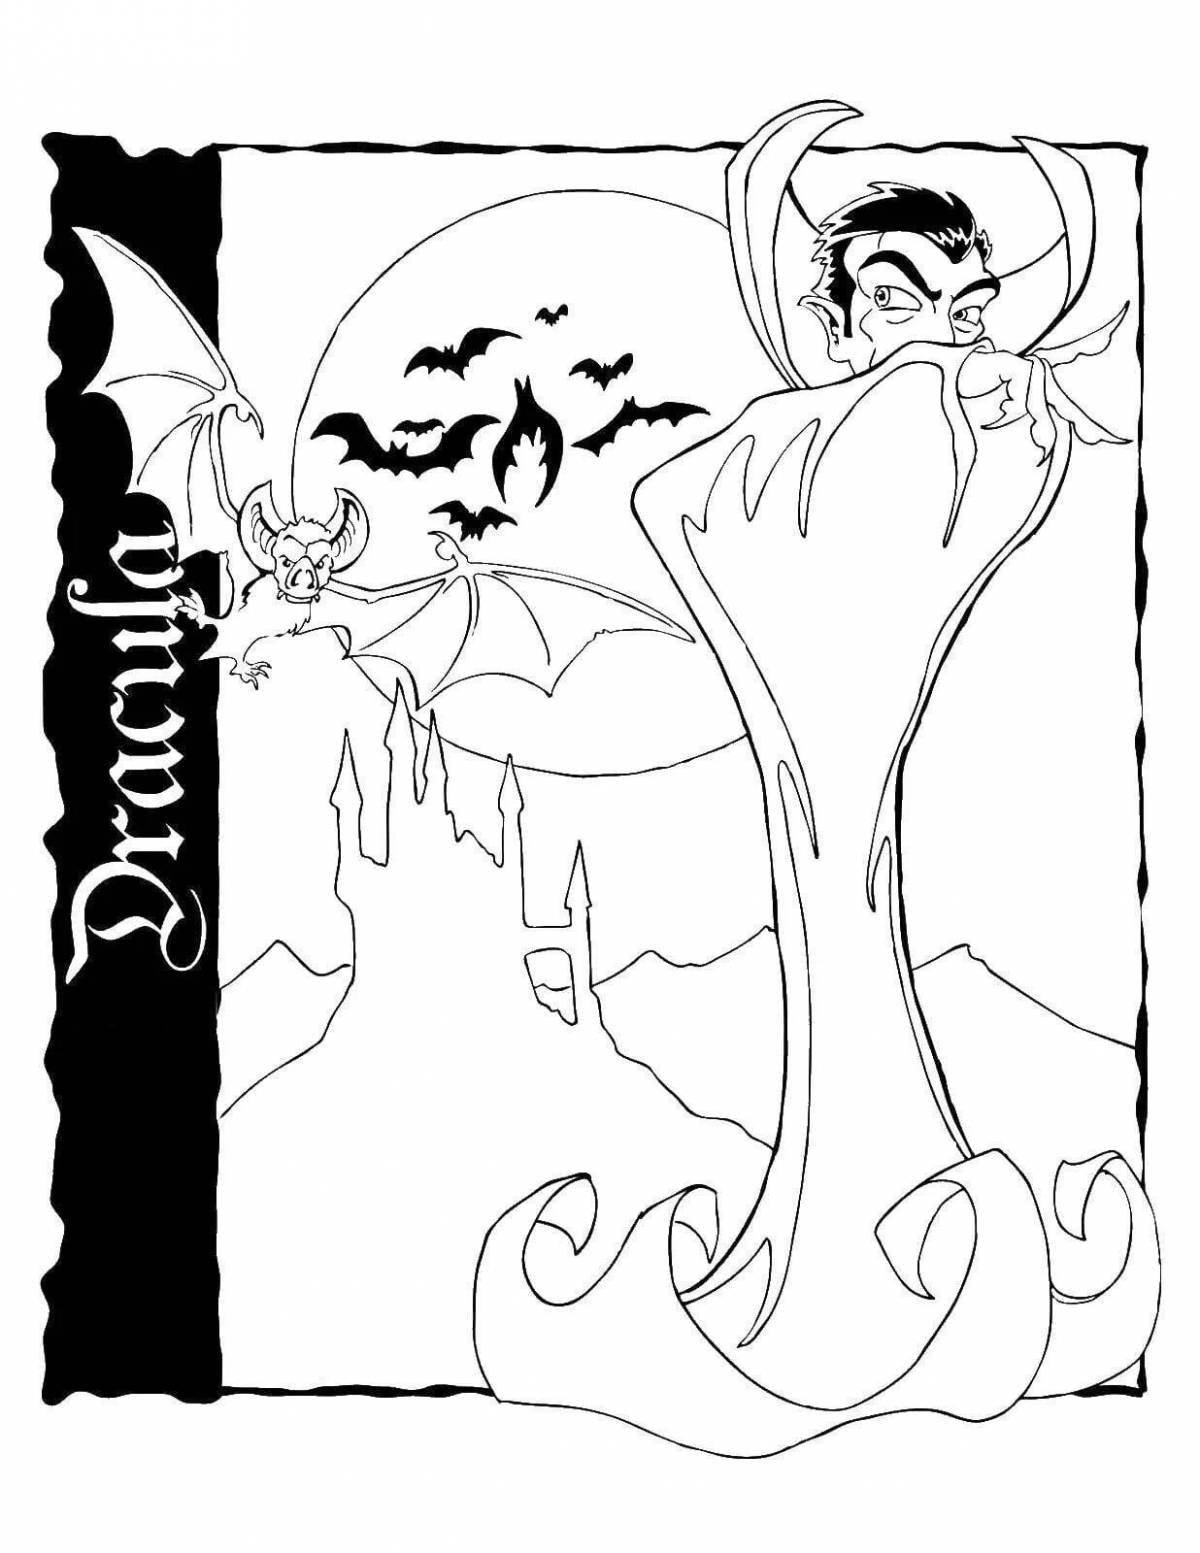 Coloring book formidable Count Dracula